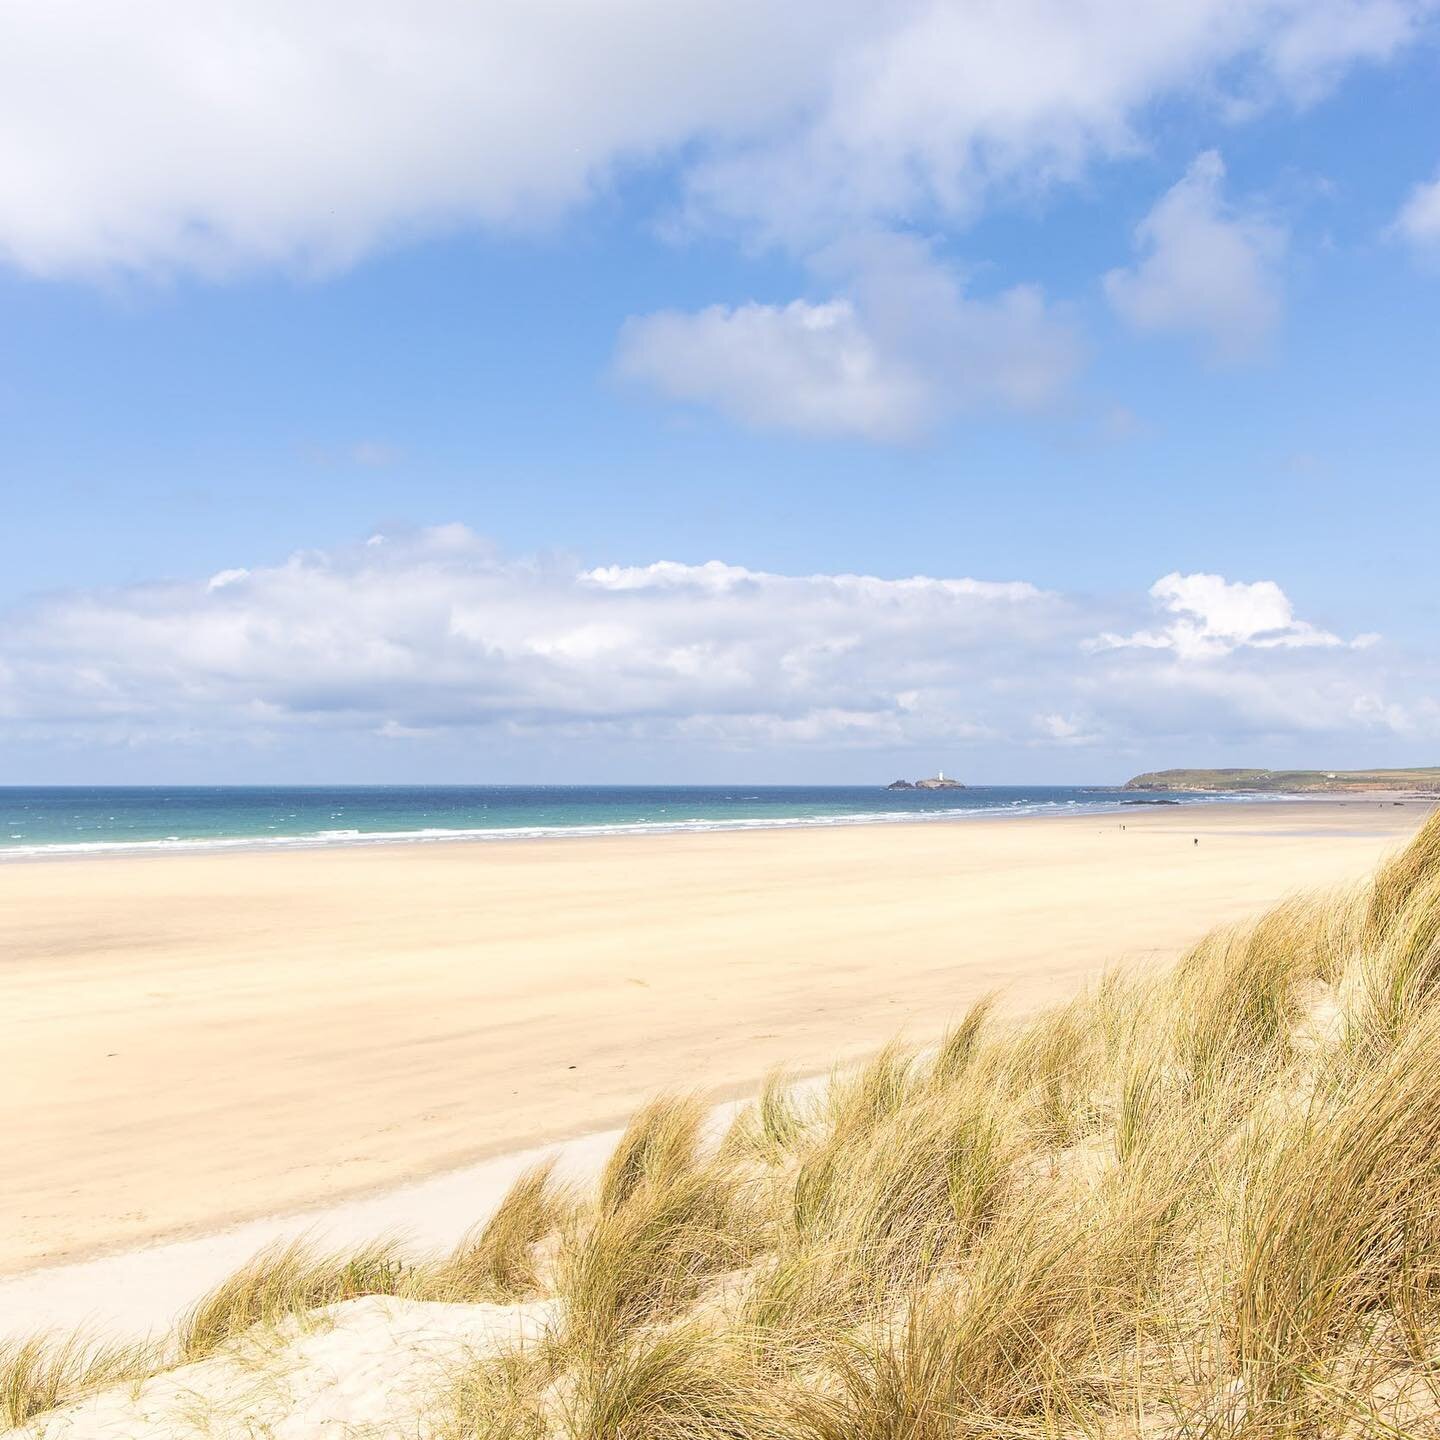 Hello folks! I hope you&rsquo;re surviving this heat ok. We&rsquo;re hiding indoors with curtains and blinds drawn - it gets absolutely roasting down here in the South East.
Here&rsquo;s another shot from the beautiful Gwithian Sands in April. A padd